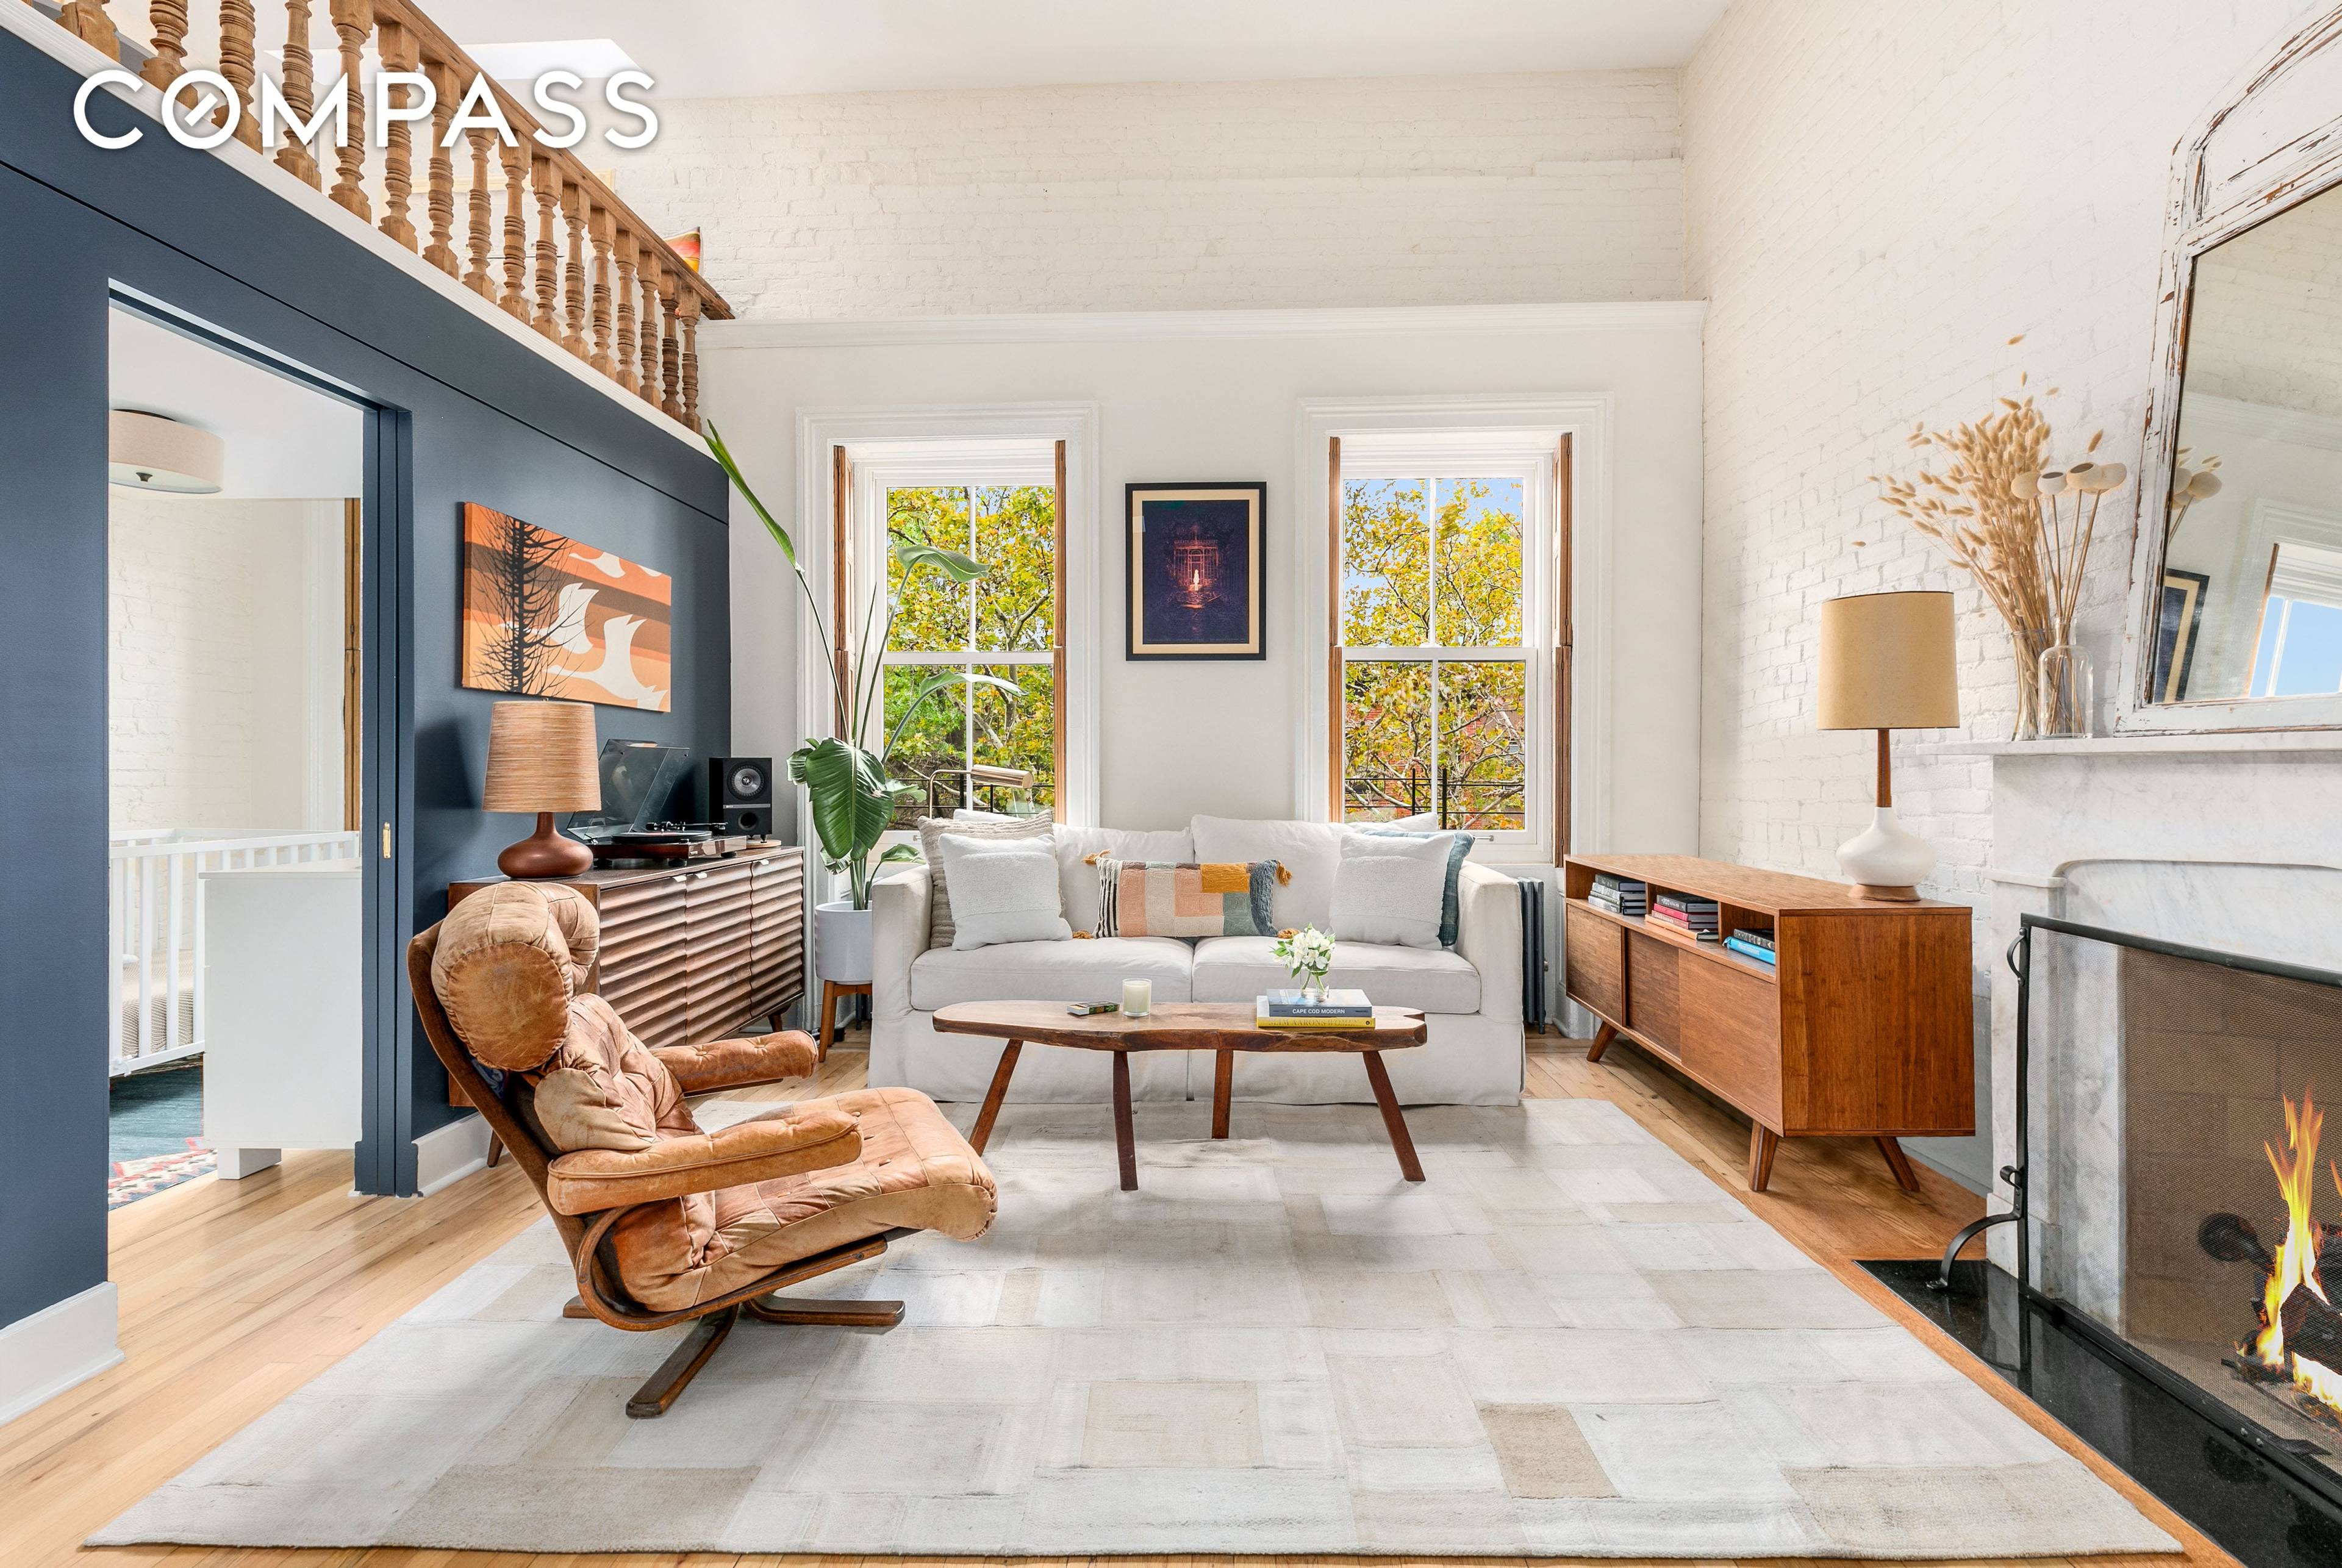 Welcome to 33 Tompkins Place, 3, a stunning multi level CONDO in a historic brownstone on one of the most coveted blocks in prime Cobble Hill.